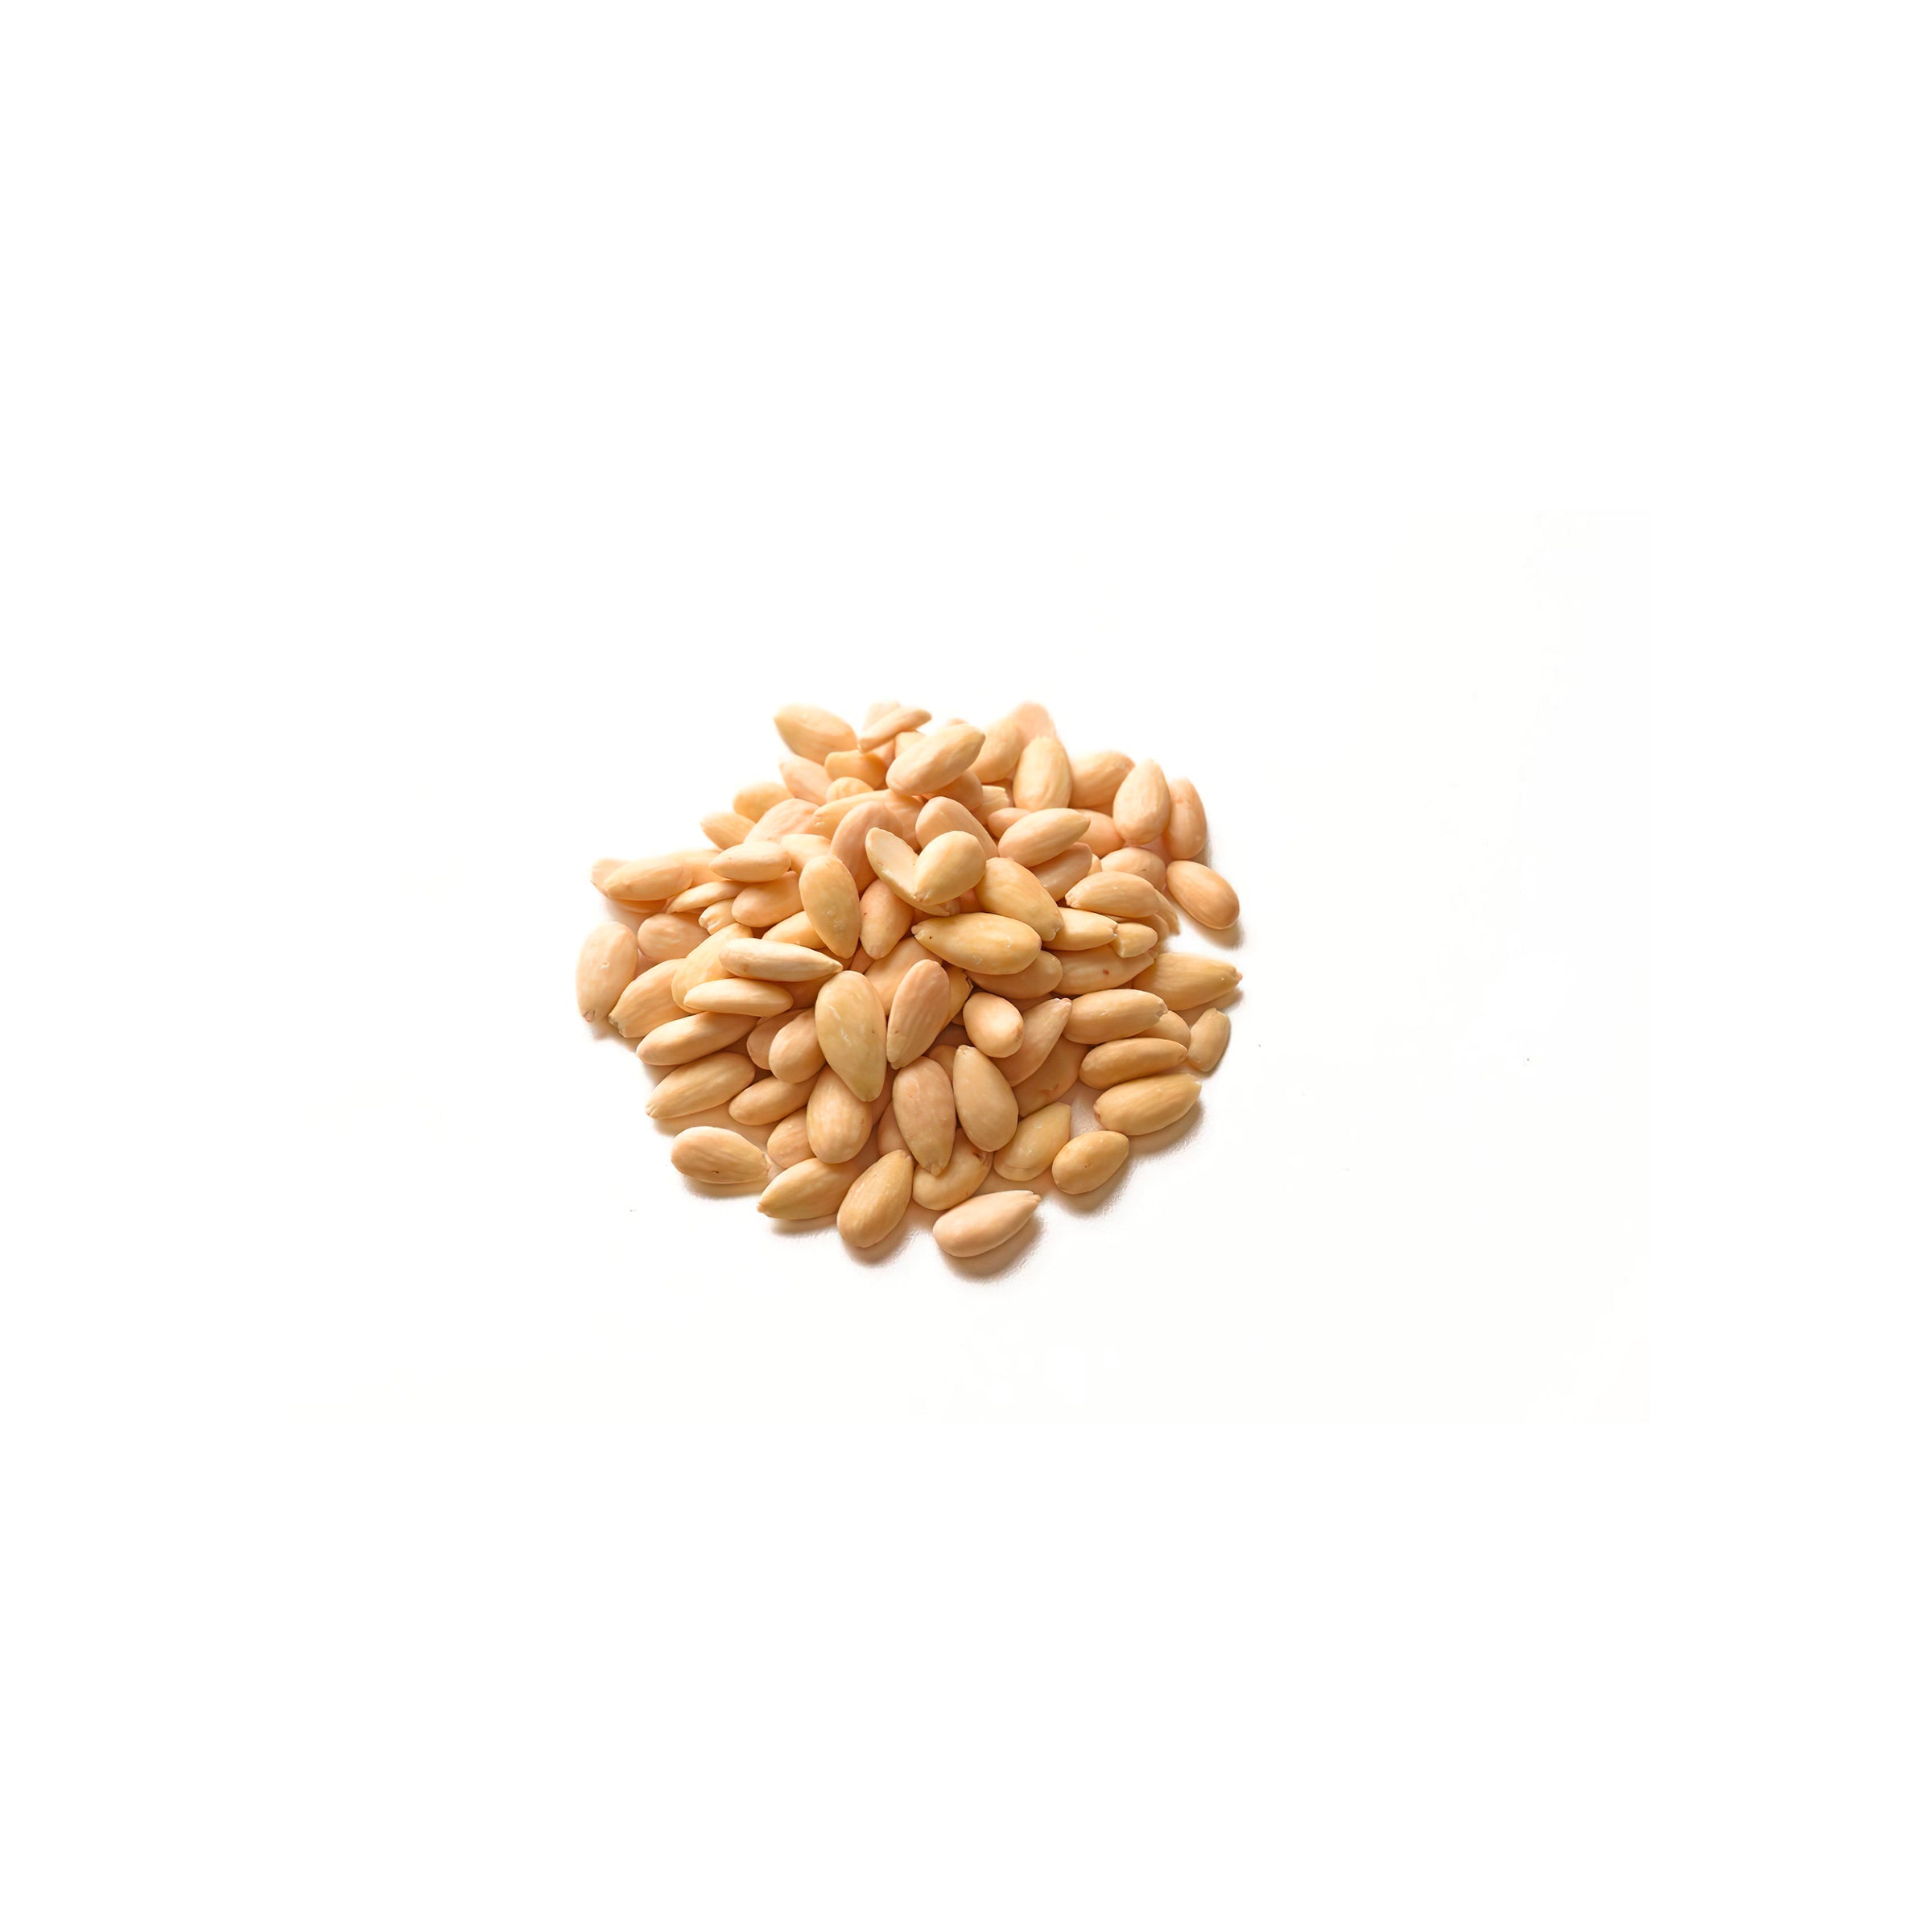 Almonds - Blanched